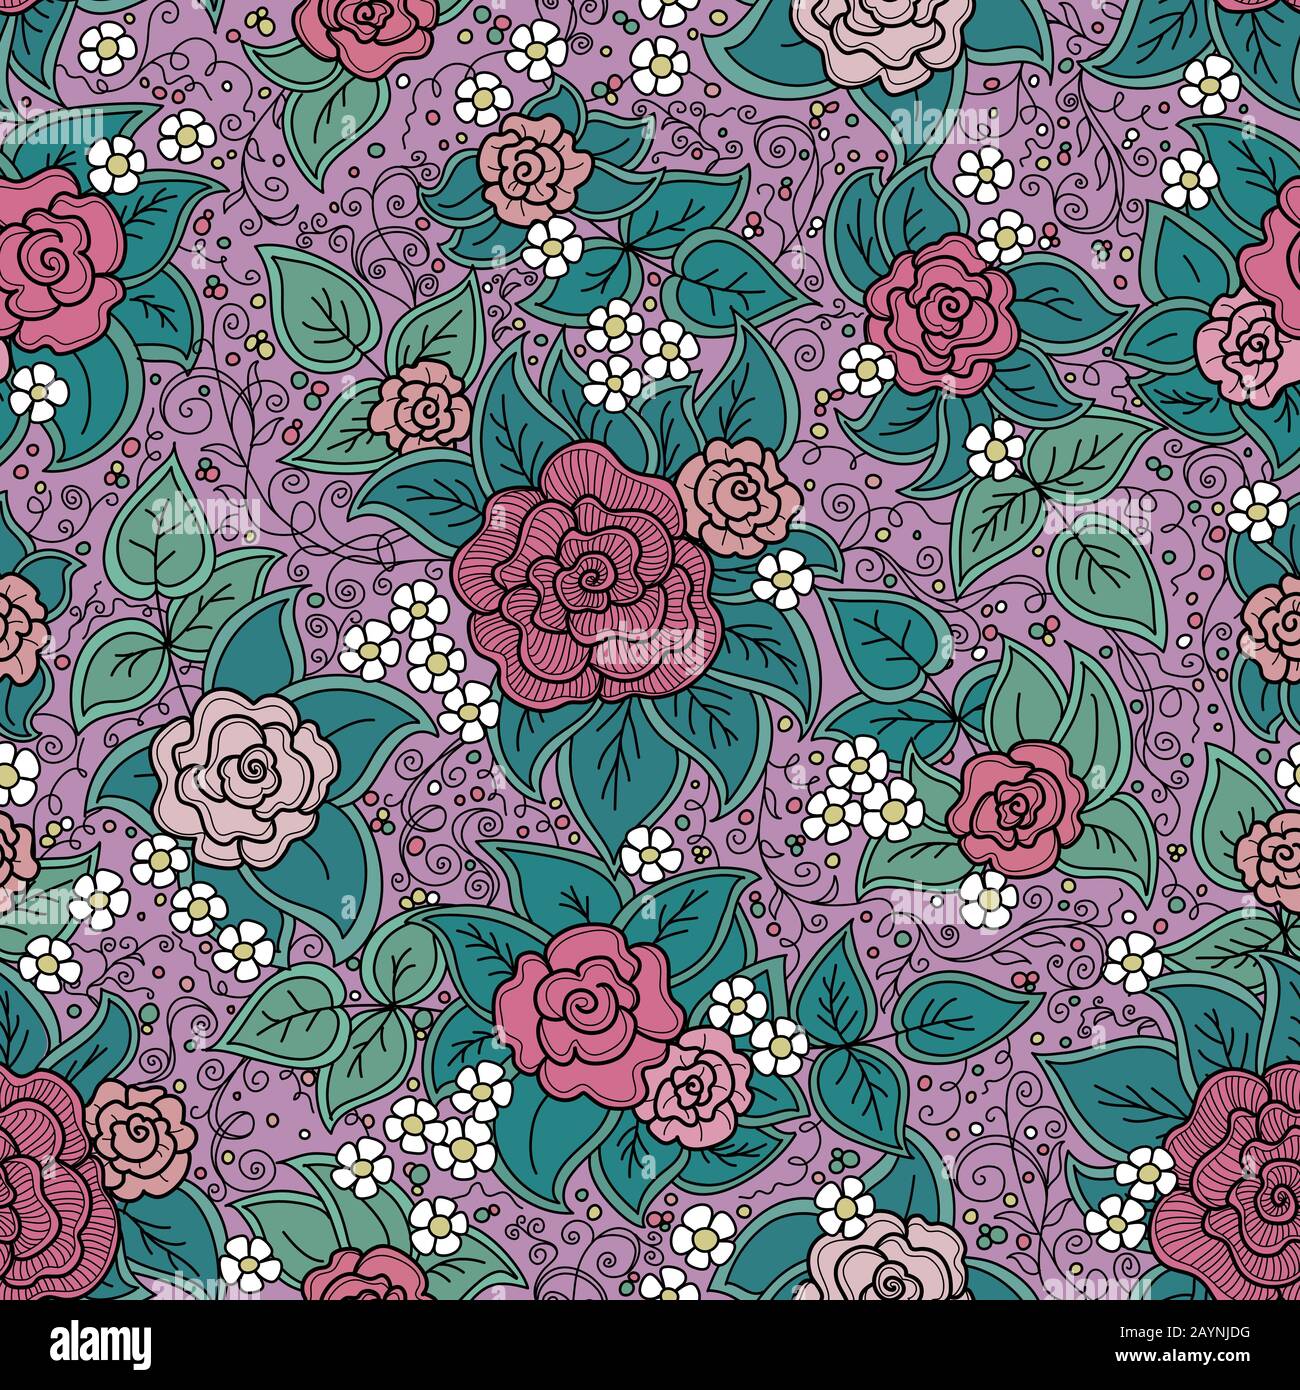 vector seamless floral pattern with roses Stock Vector